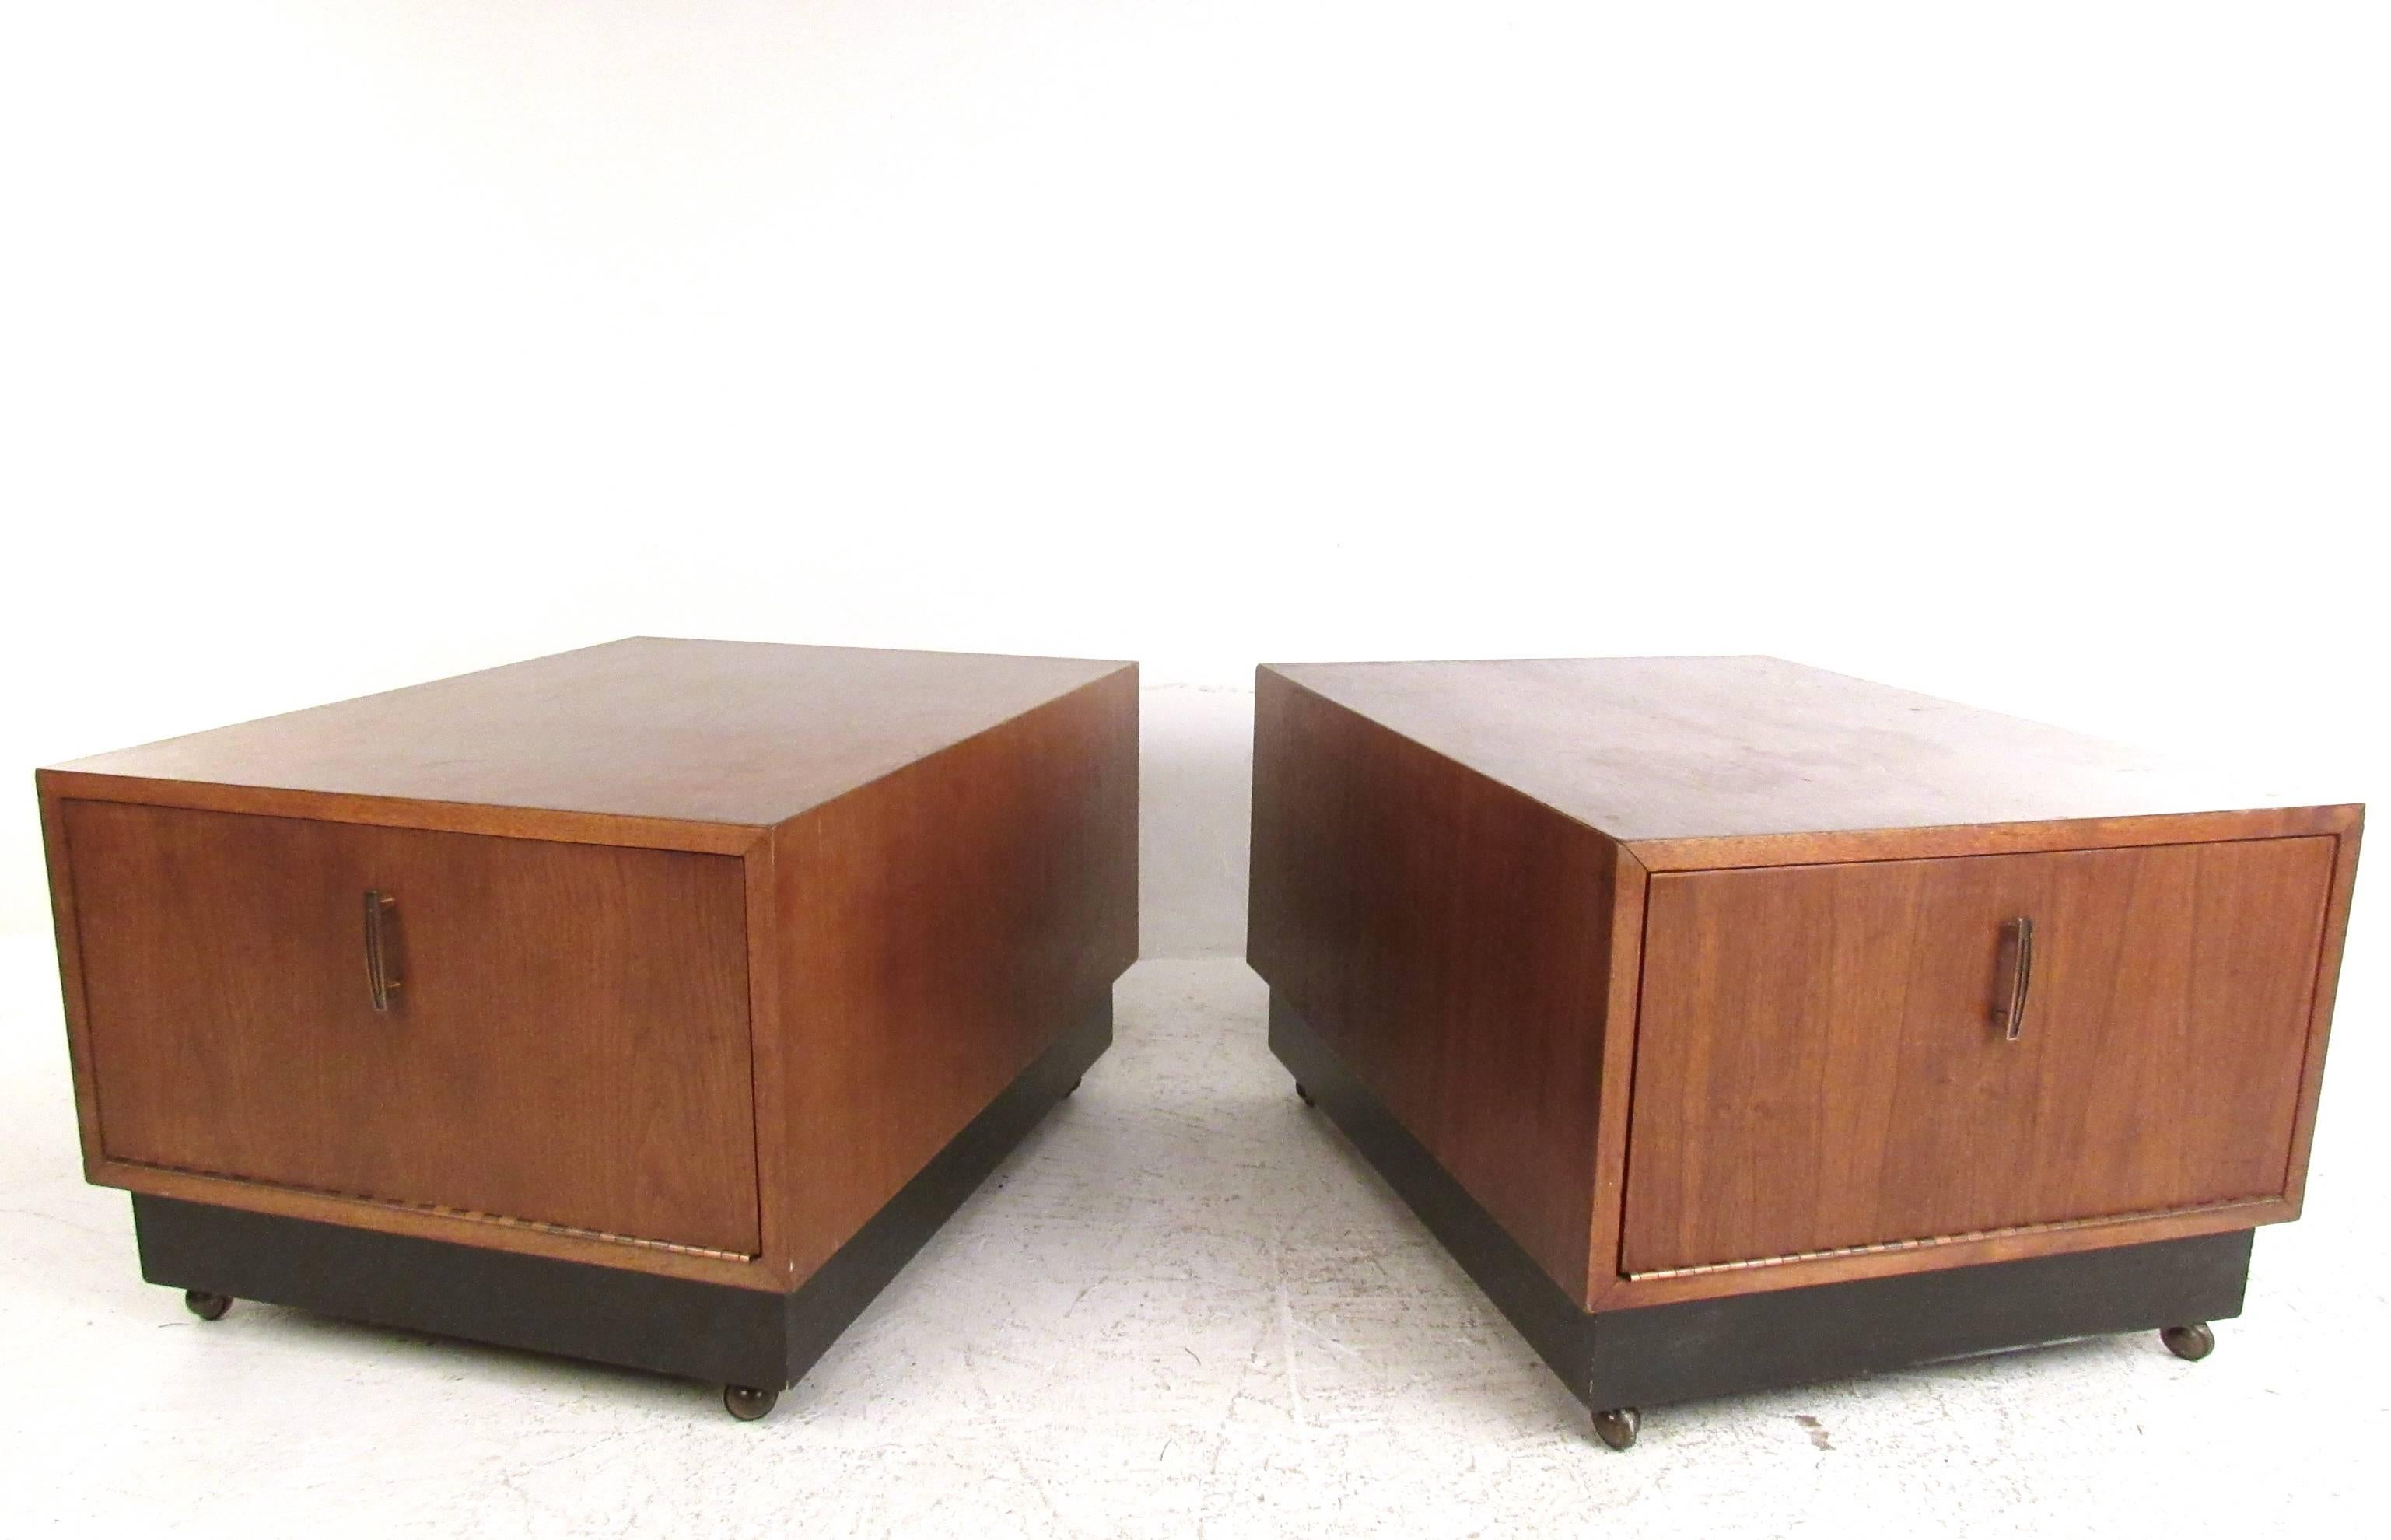 This pair of rolling end tables feature spacious drop front cabinet space for ample storage in any setting. Stylish design with vintage handles feature a beautiful walnut finish and are conveniently fitted with casters for ease of movement. Please